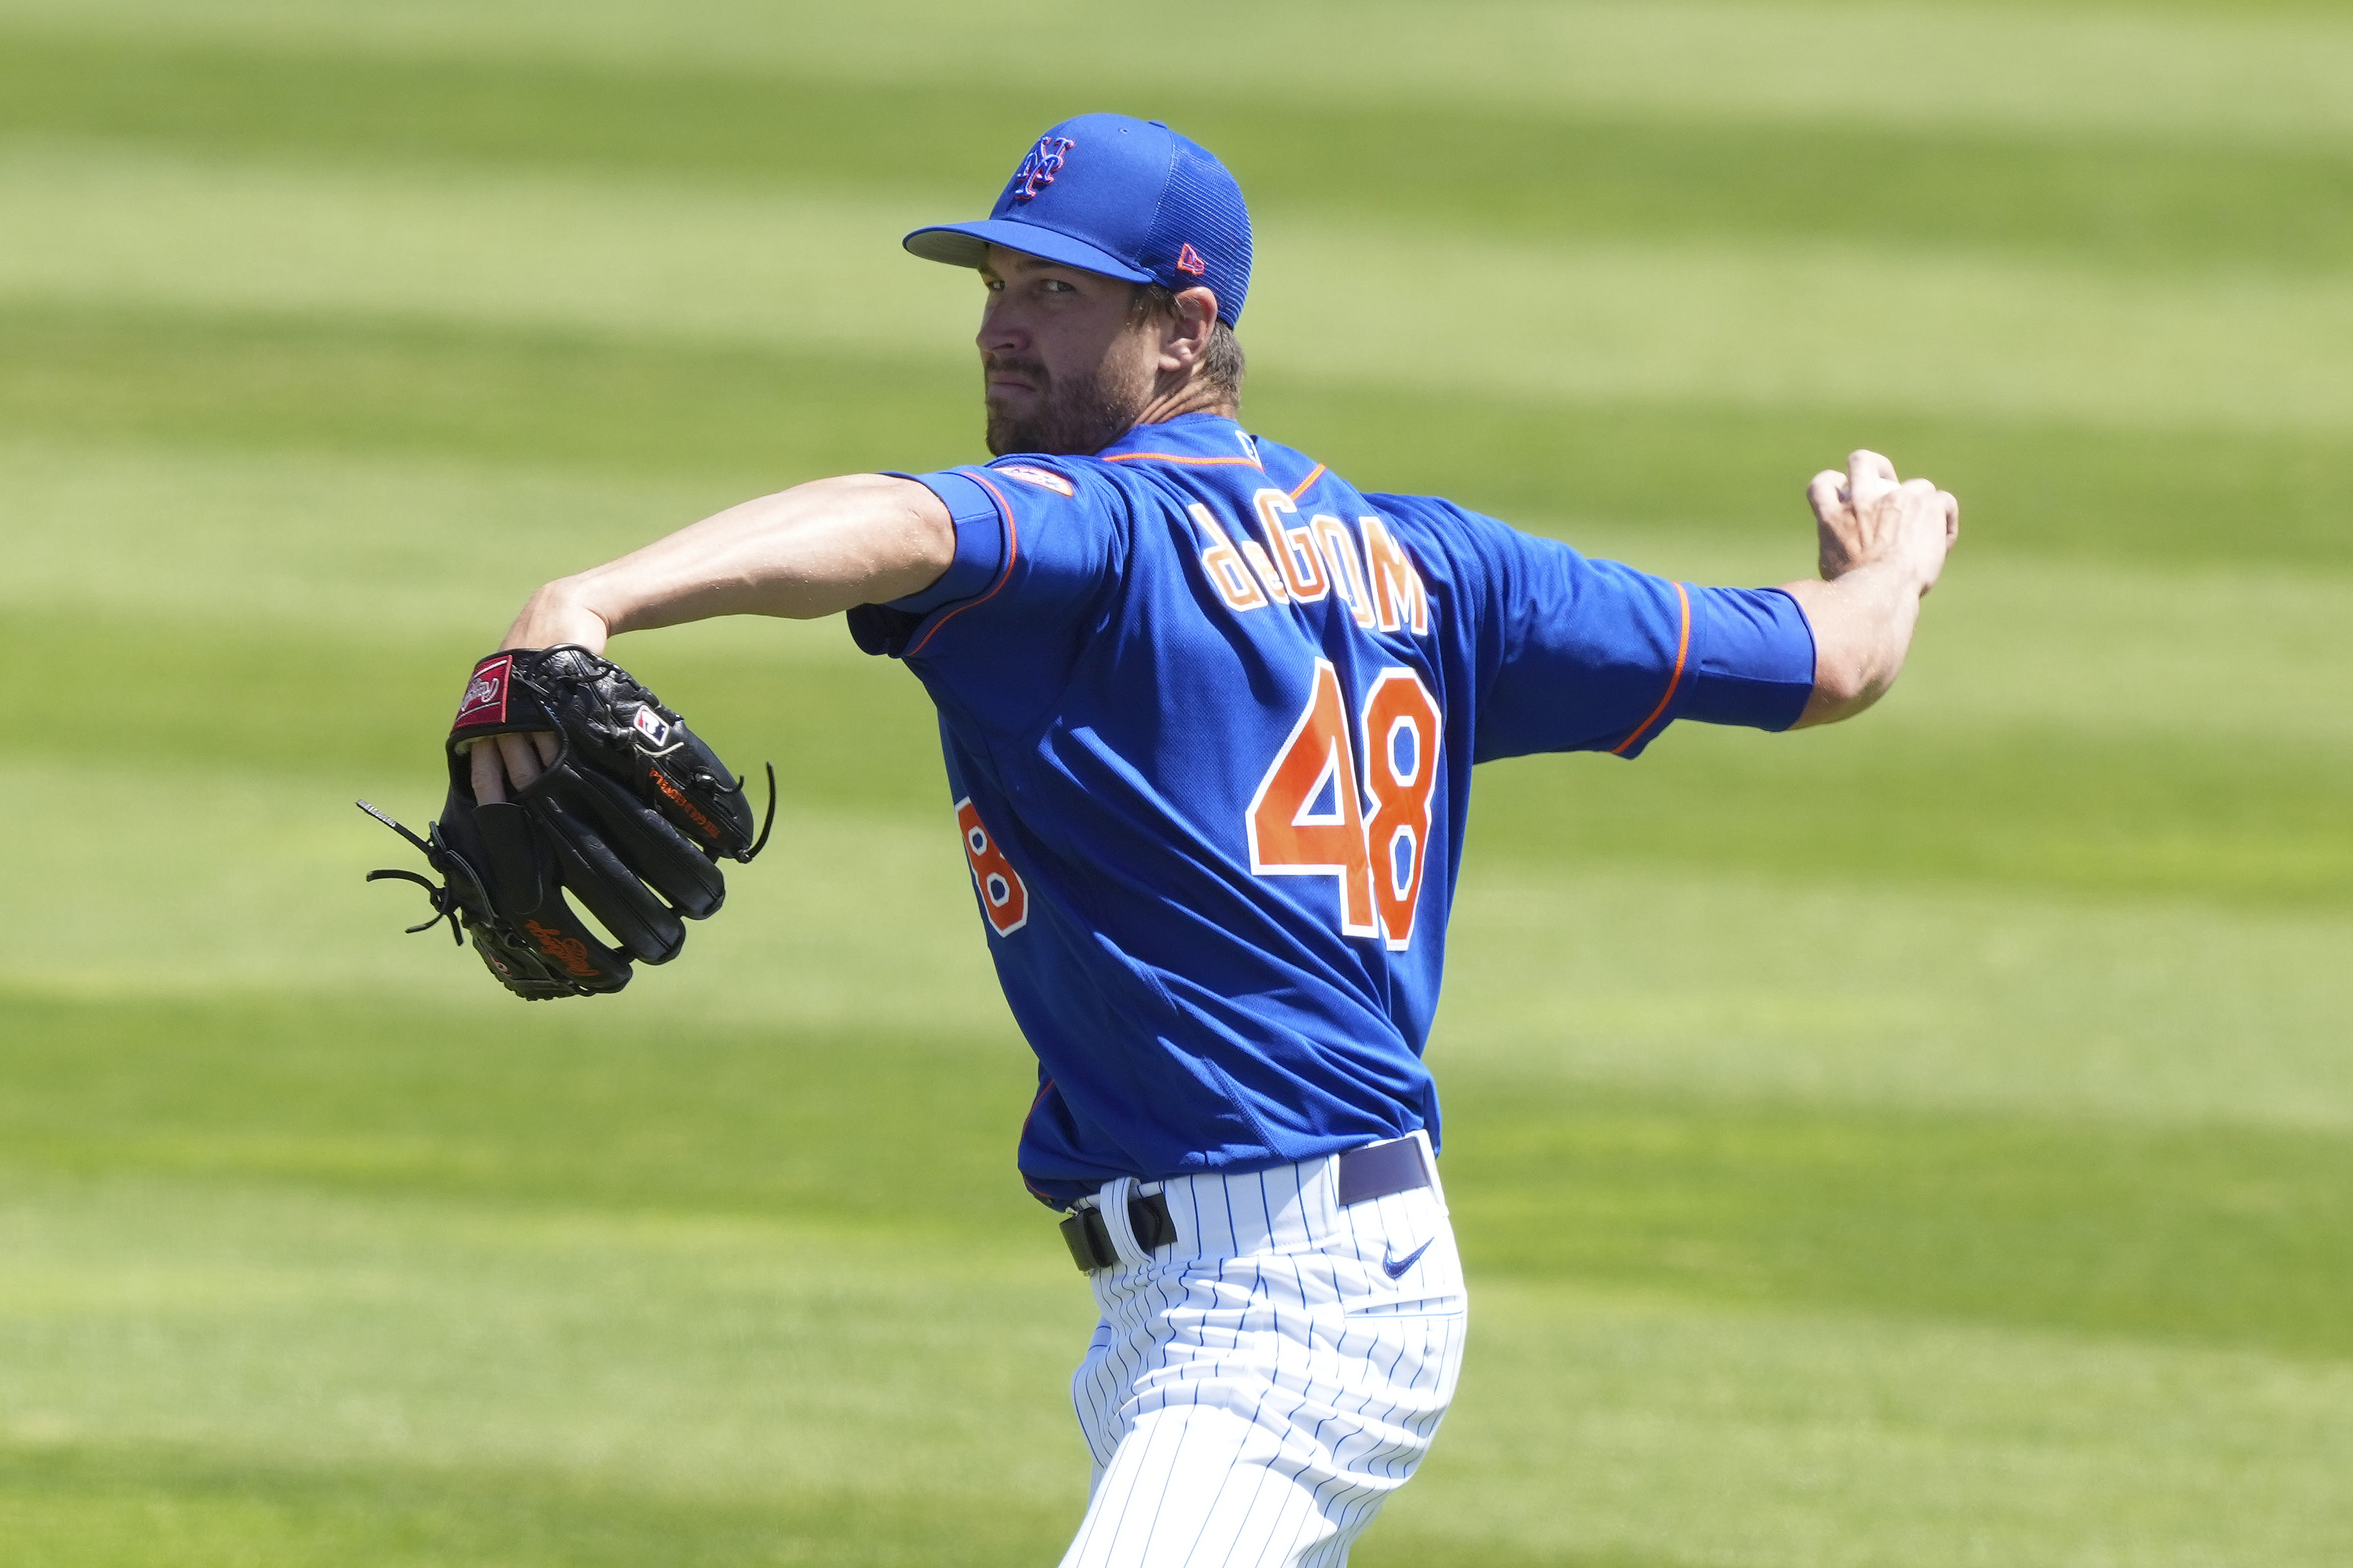 Mets clubhouse manager reportedly admitted to betting on baseball